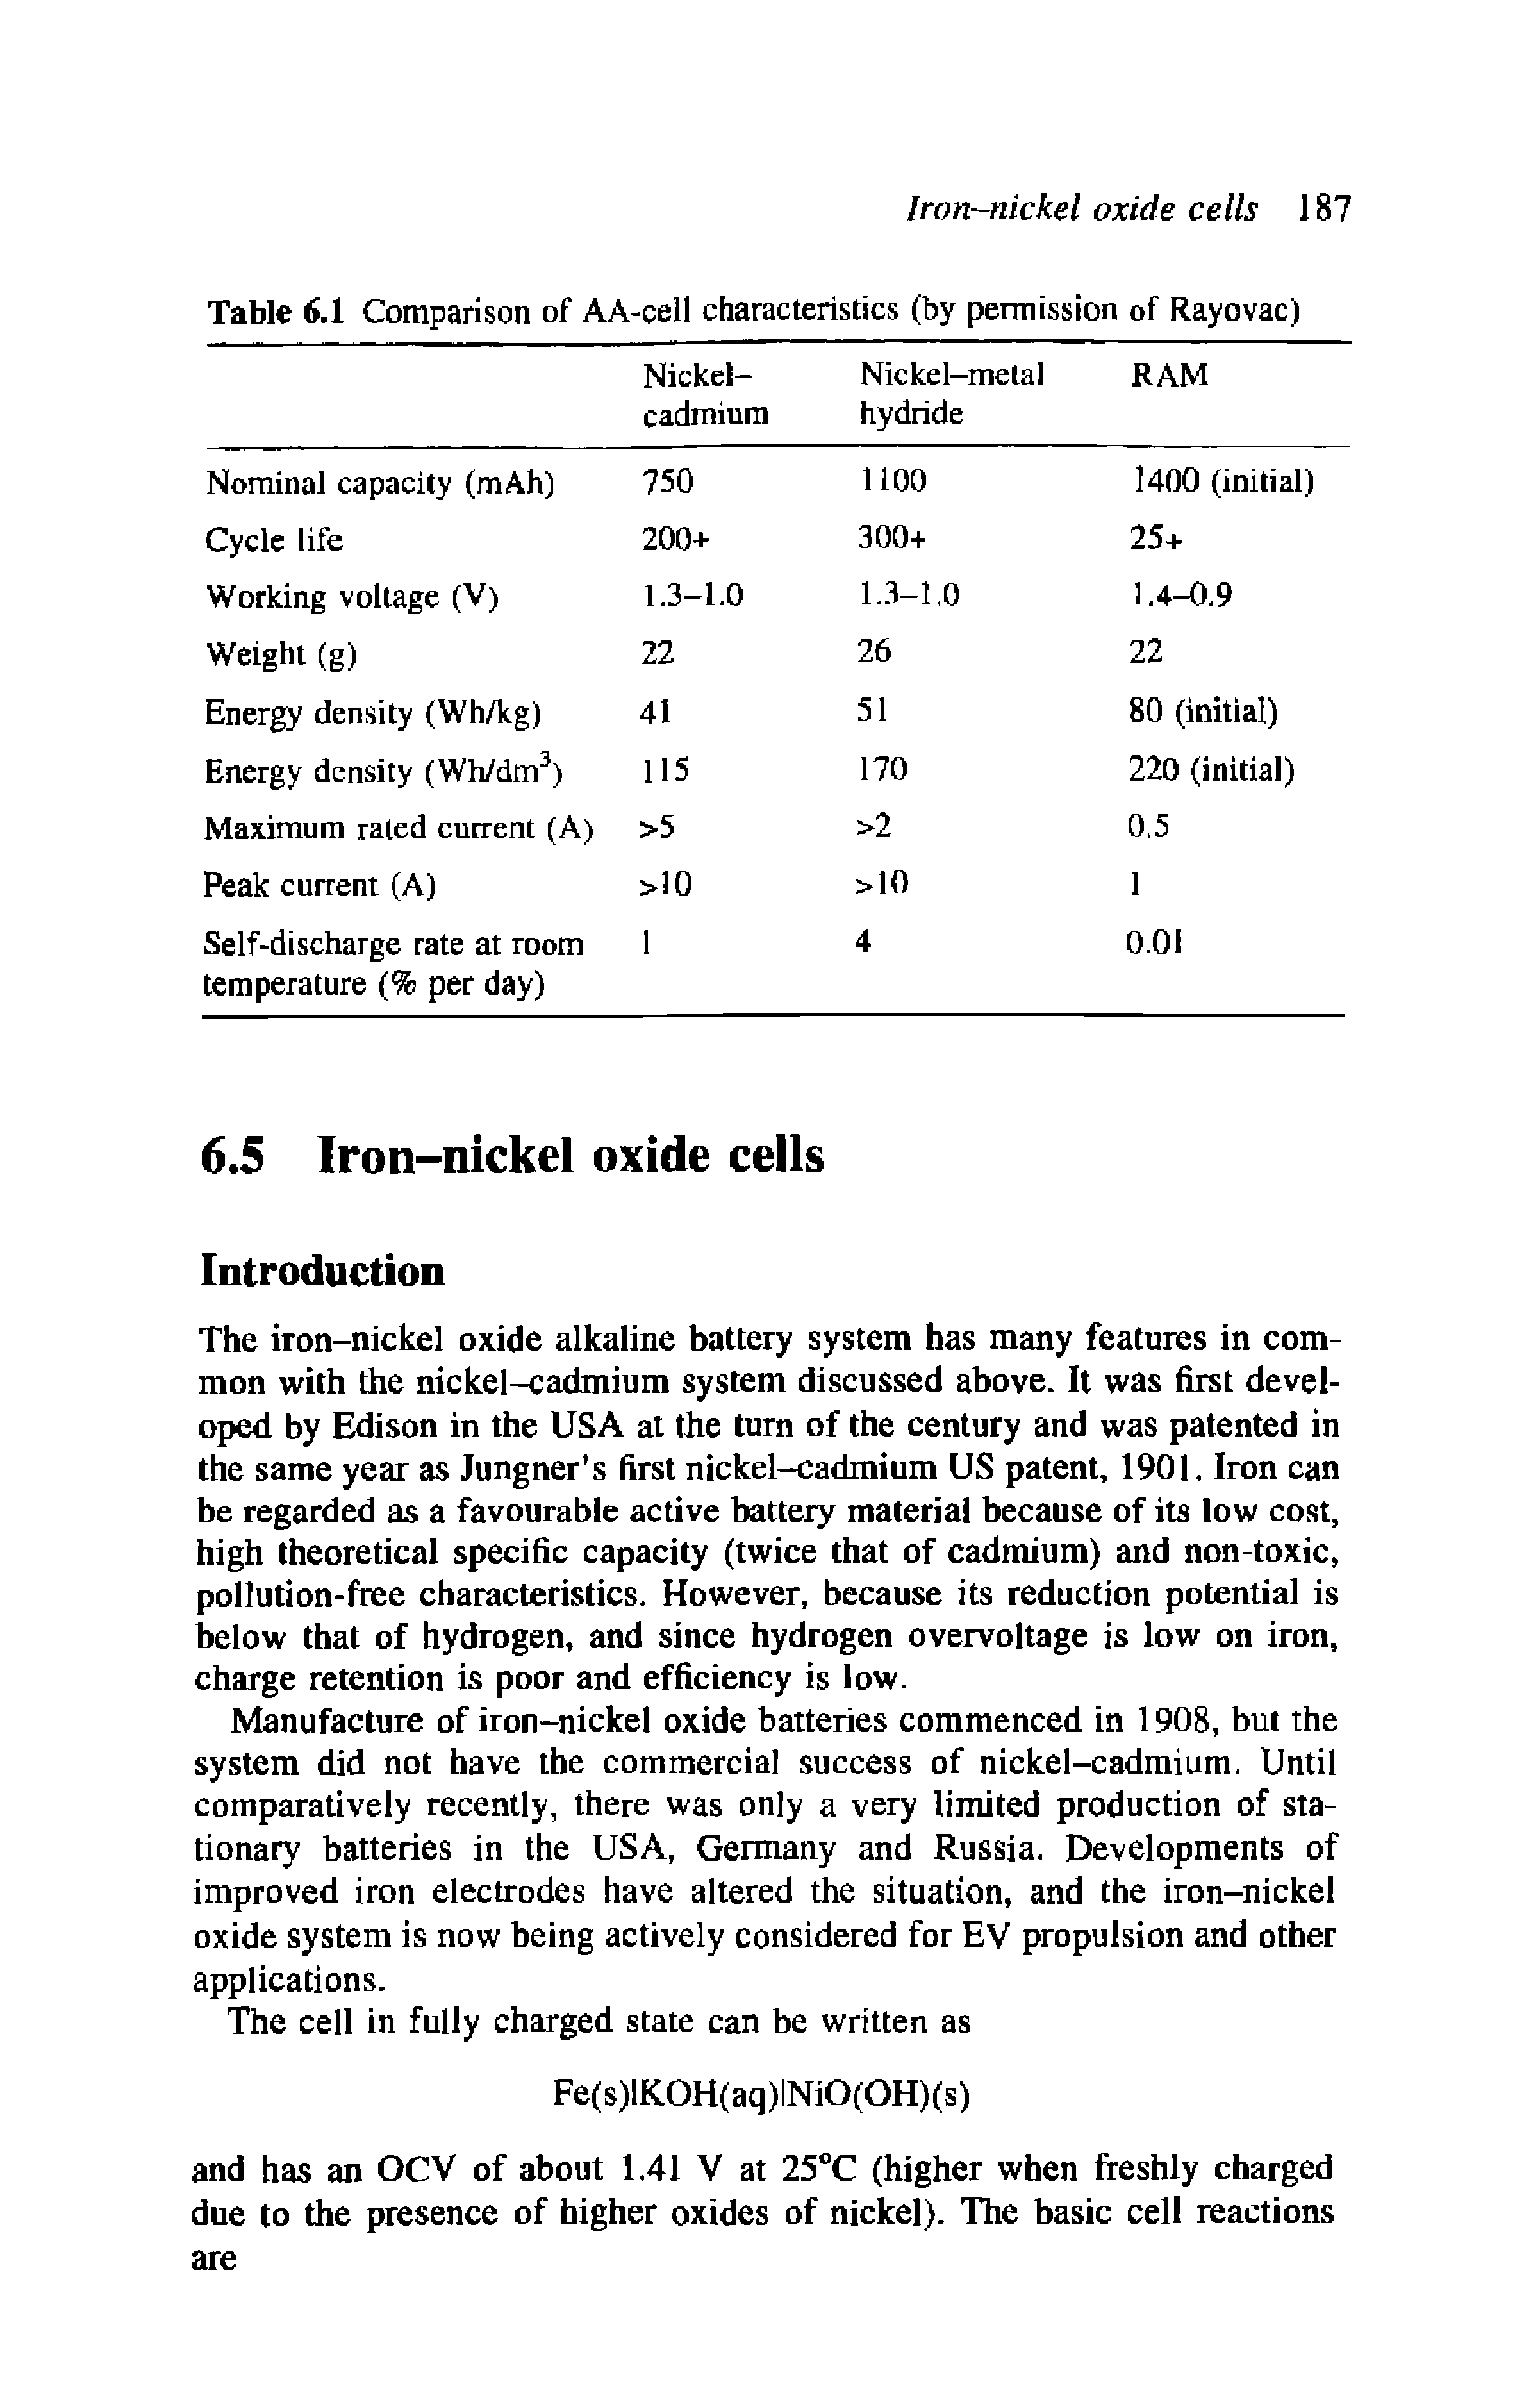 Table 6.1 Comparison of AA-cell characteristics (by permission of Rayovac)...